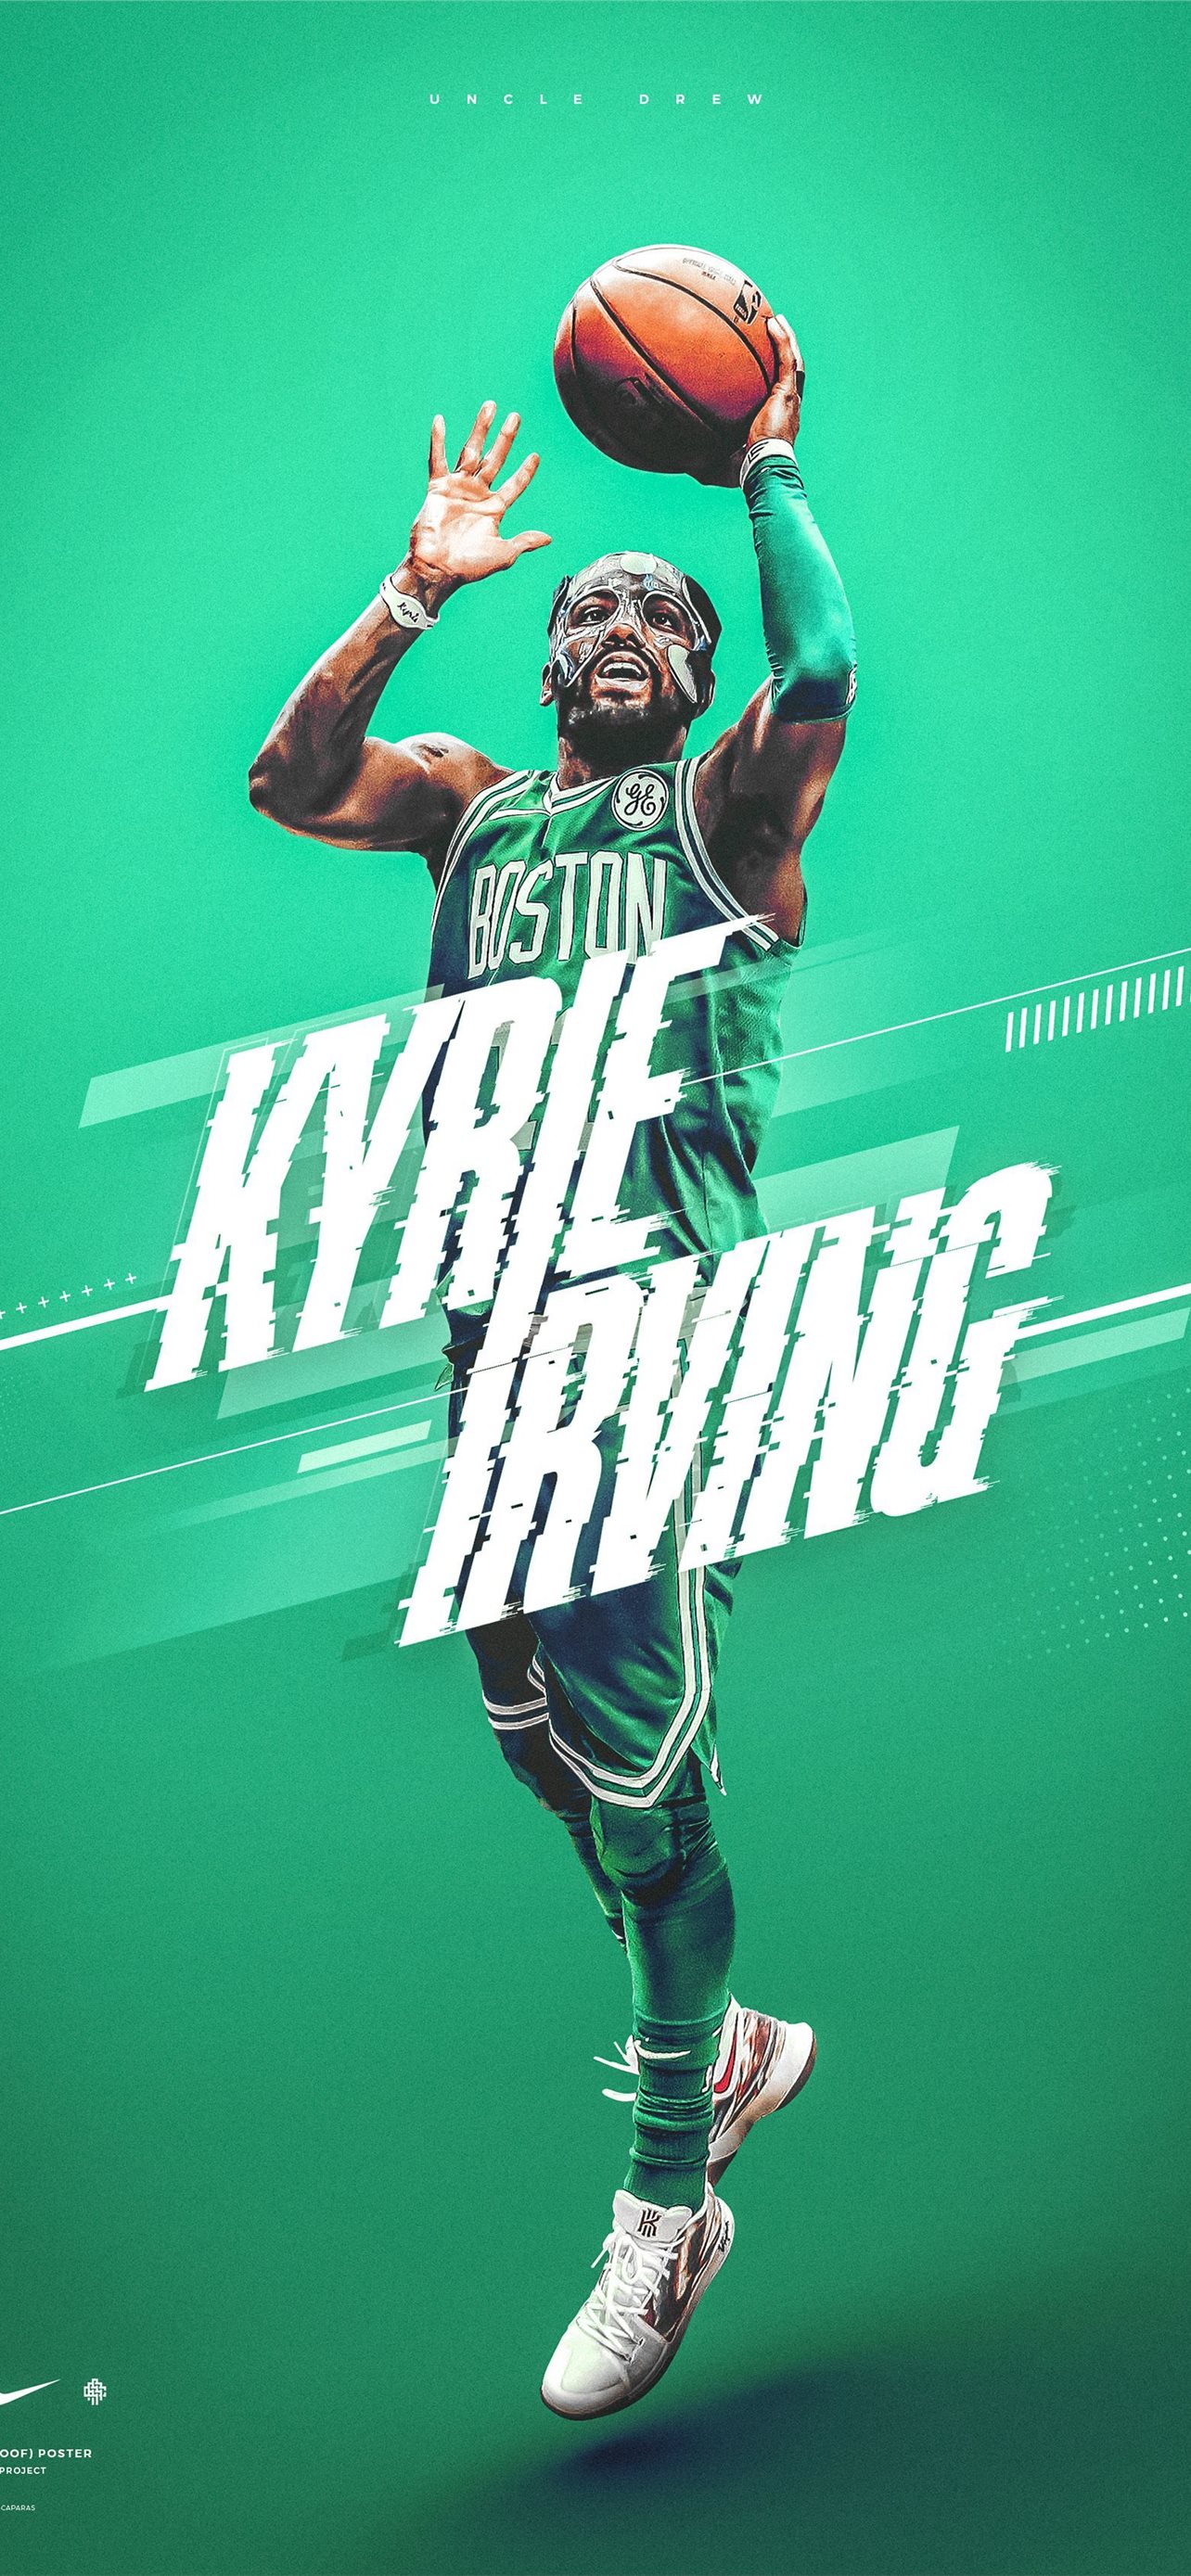 Free download download this iphone wallpaper you can download our iphone  wallpapers 325x576 for your Desktop Mobile  Tablet  Explore 42 Boston Celtics  iPhone Wallpaper  Boston Celtics Desktop Wallpaper Boston